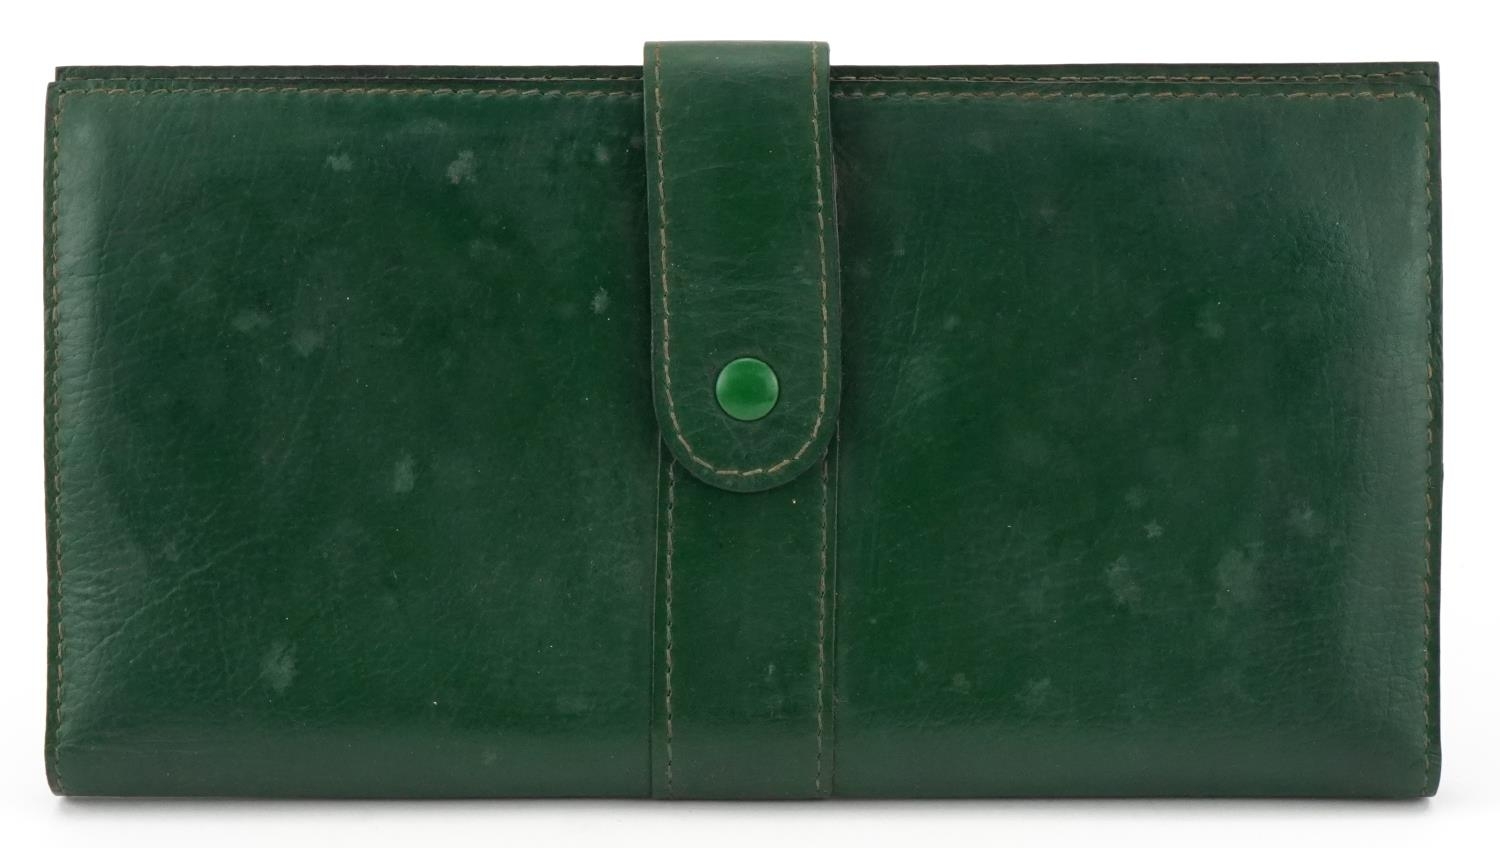 Rolex Cellini green leather wristwatch case with box and paperwork - Image 2 of 6